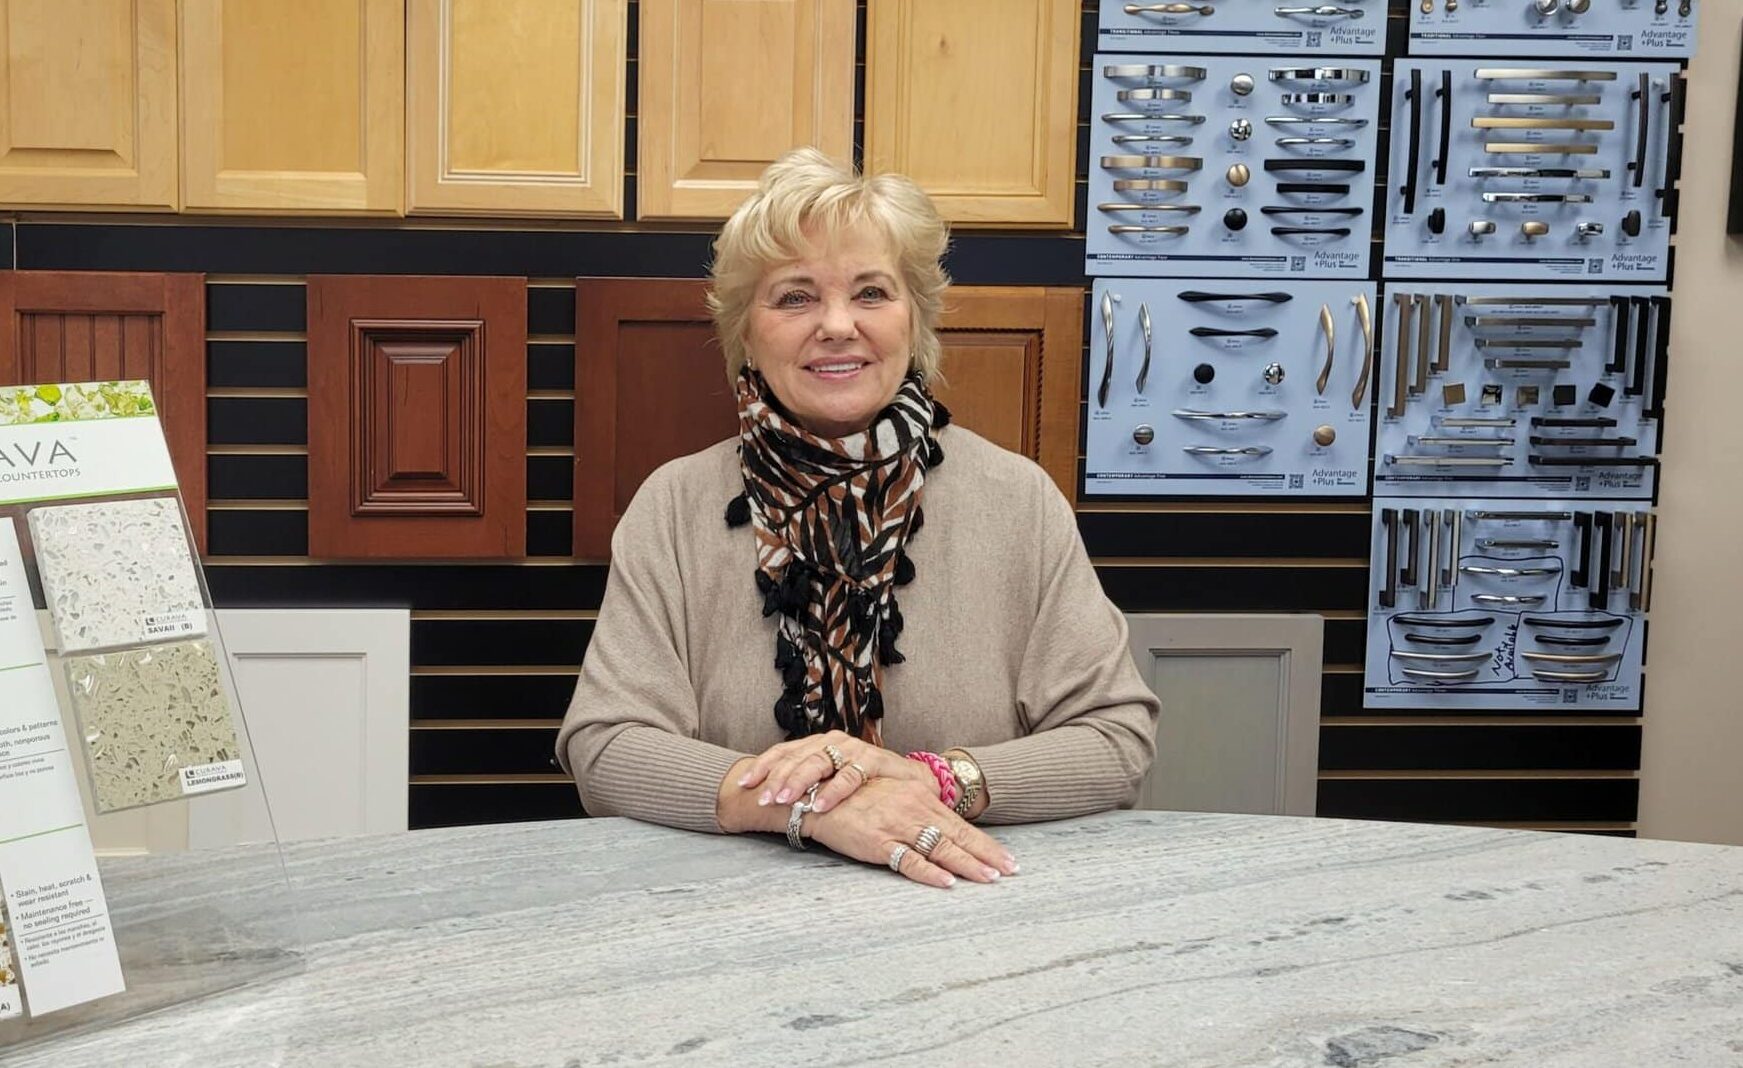 Nu-Face Kitchens provides beautiful upgrades at comfortable price